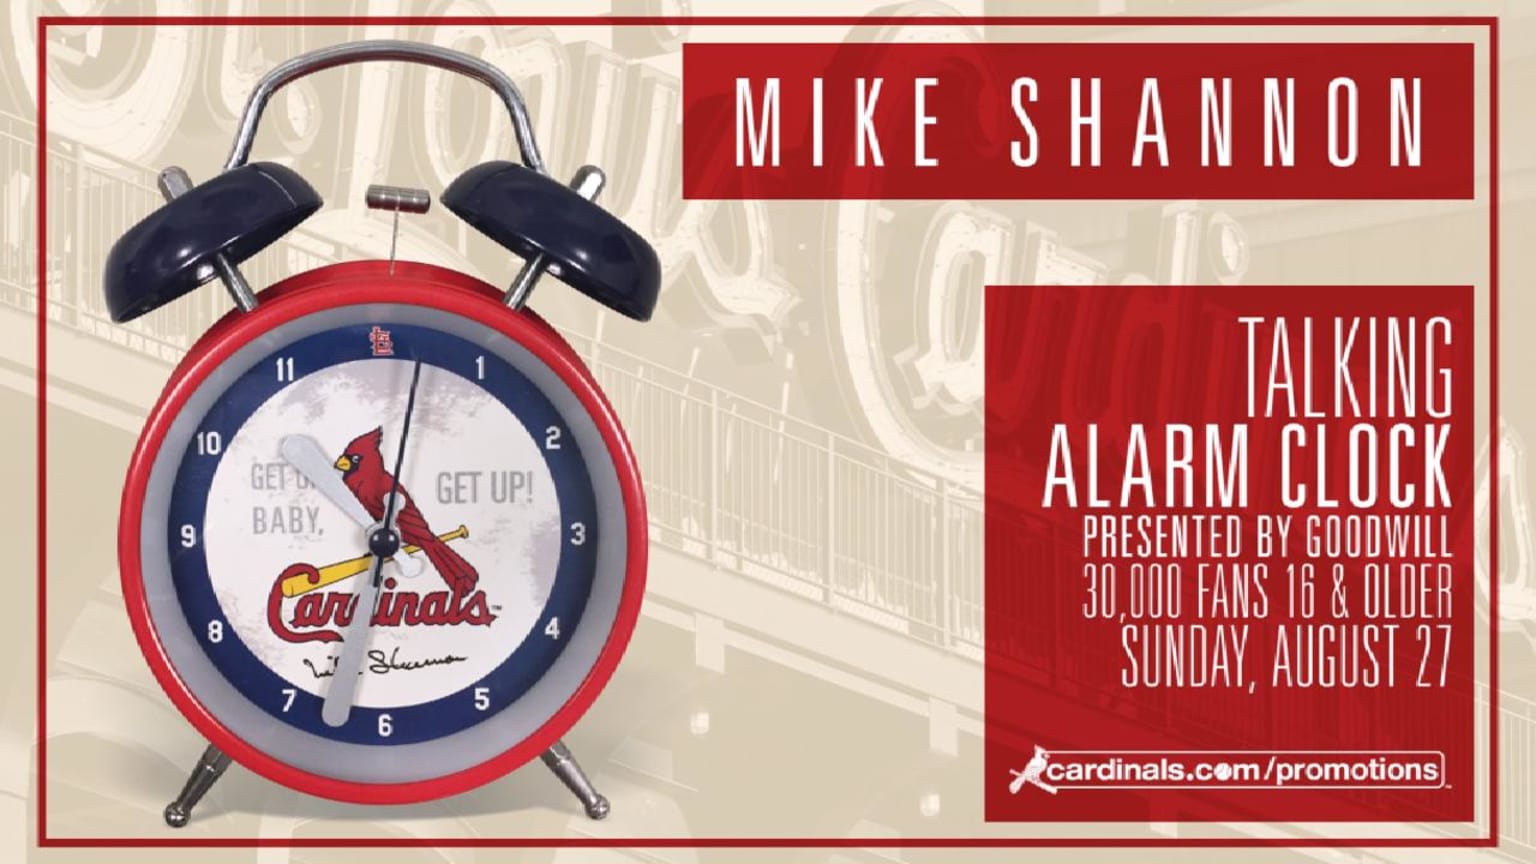 mike shannon cardinals get up baby｜TikTok Search